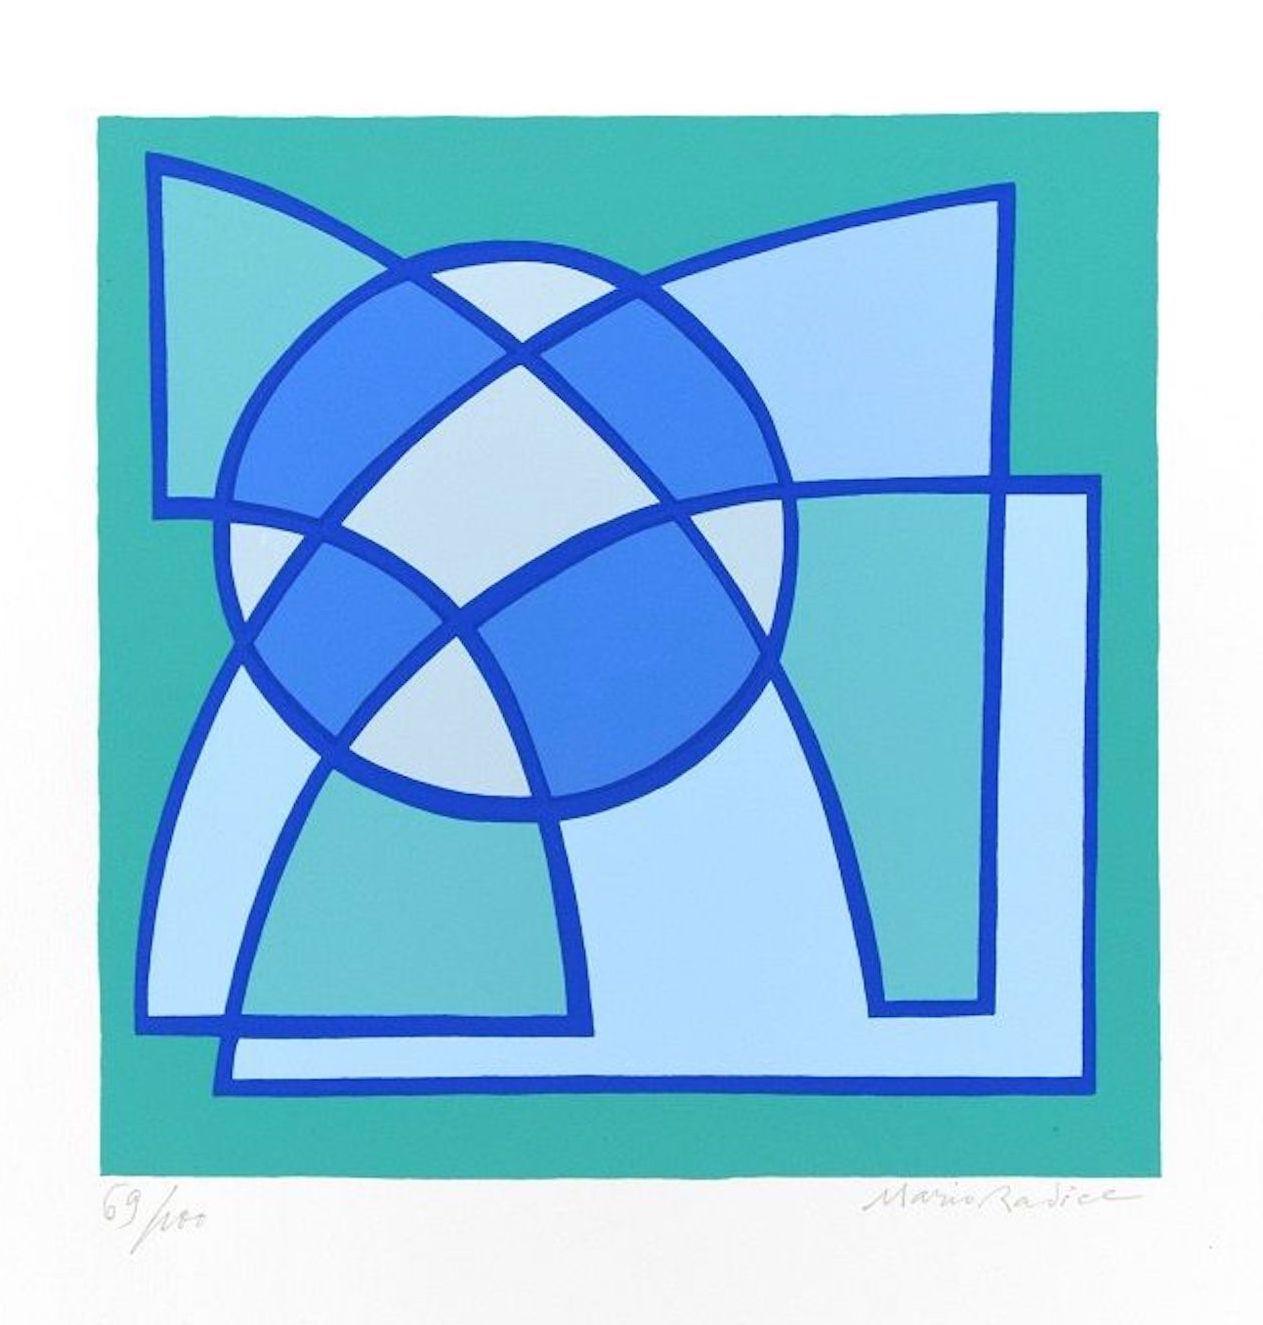 Image dimensions: 23.6 x 23.2 cm.

De Profundis Clamavi is a beautiful original colored serigraph on paper, realized by the Italian artist and one of the pioneer of the Abstract art, Mario Radice (1898-1987) and published in 1964 by La Nuova Foglio,